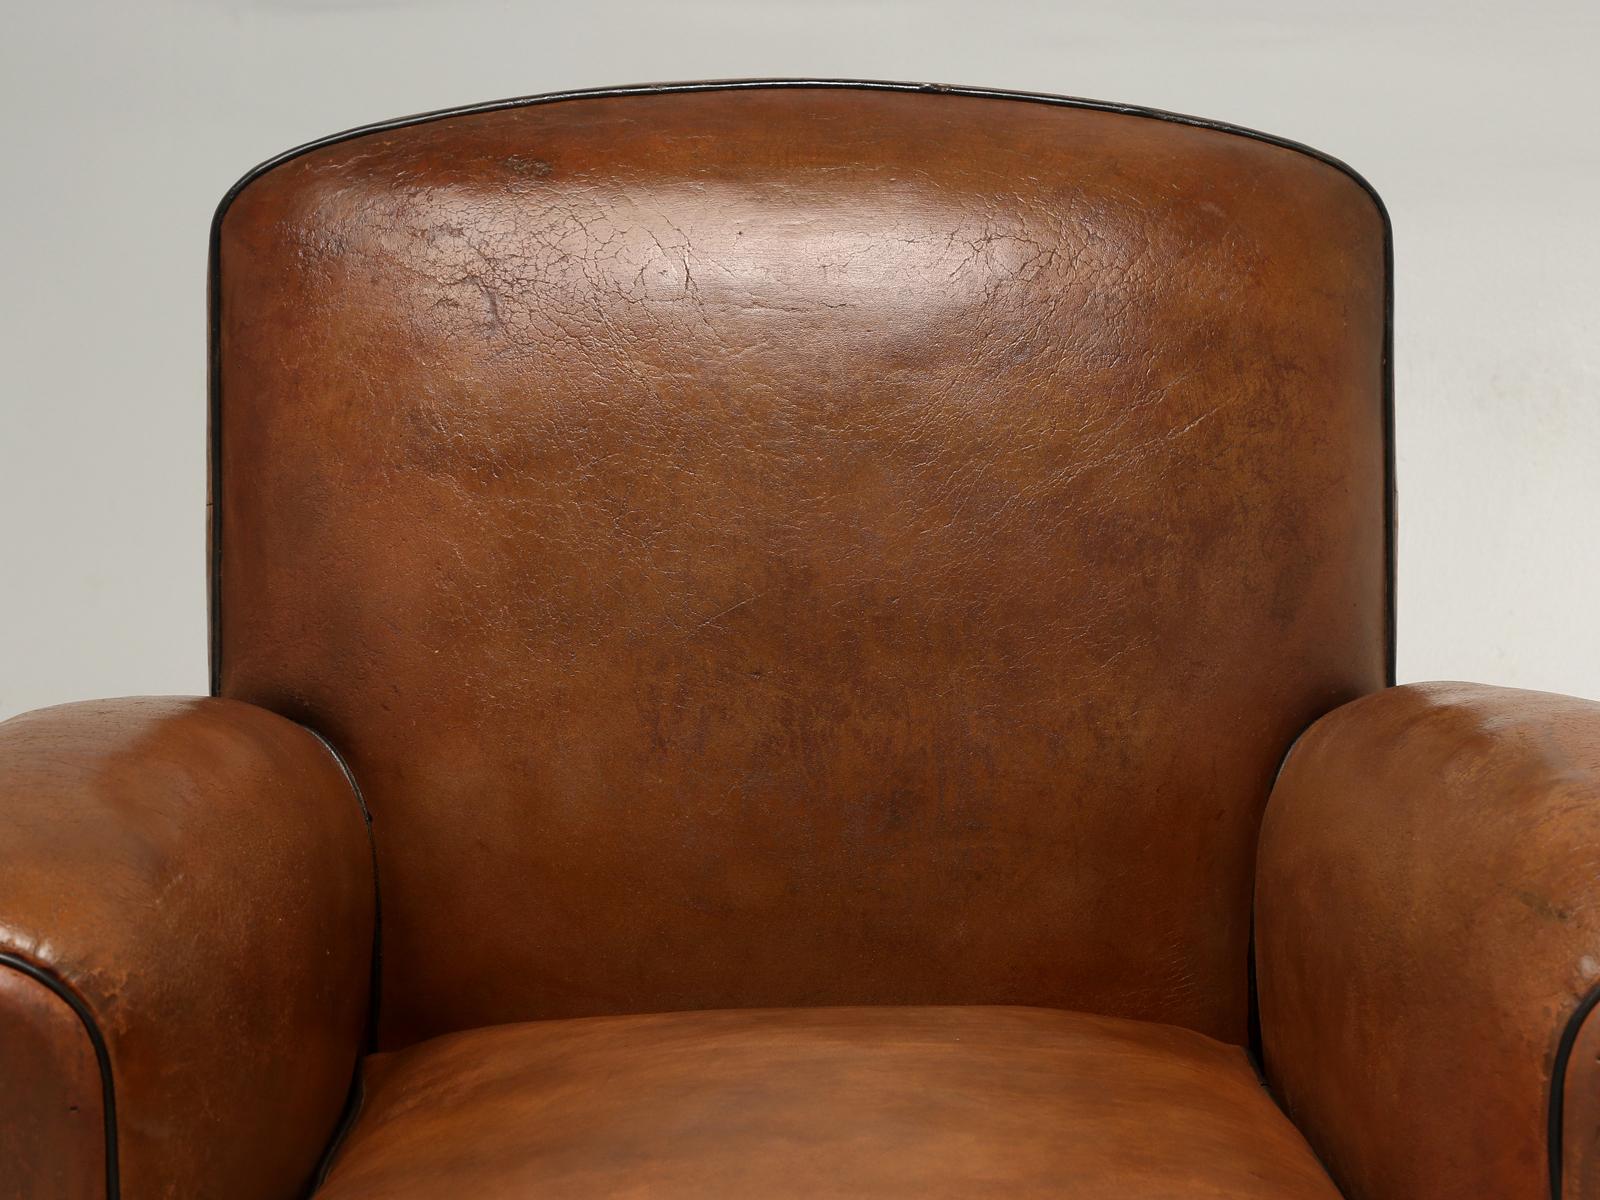 Hand-Crafted French Leather Club Chairs Thoroughly Restored